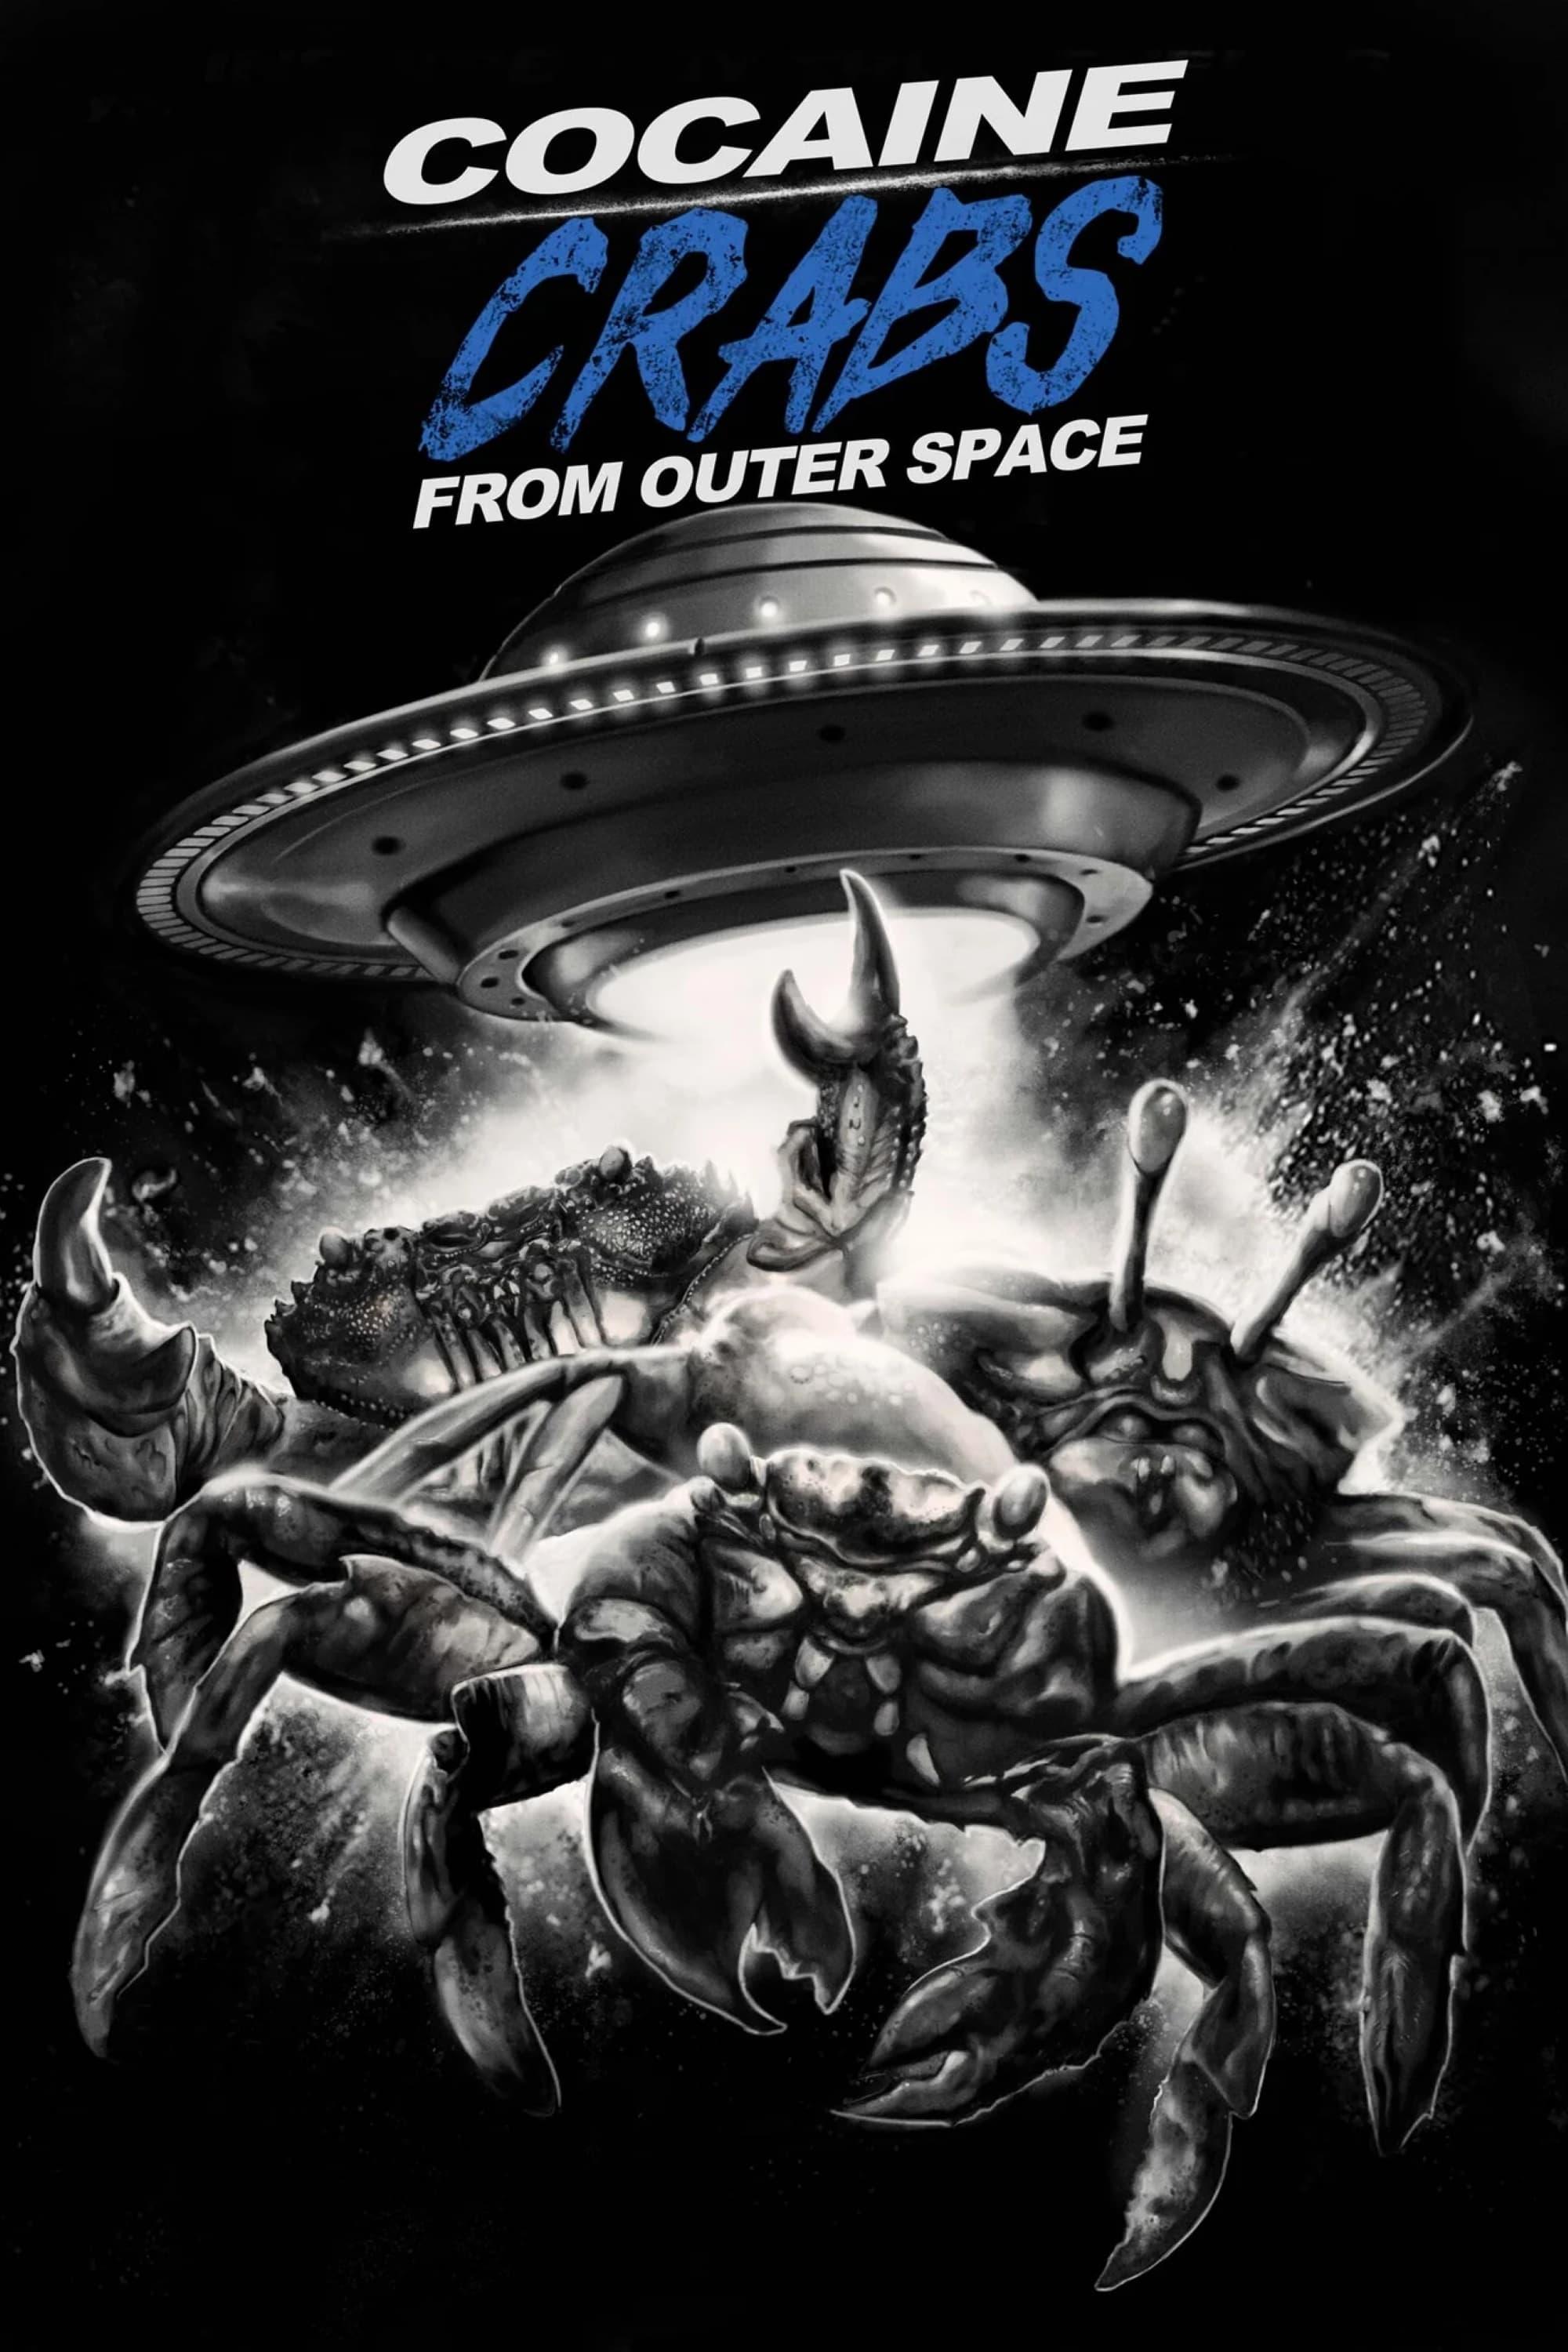 Cocaine Crabs From Outer Space poster